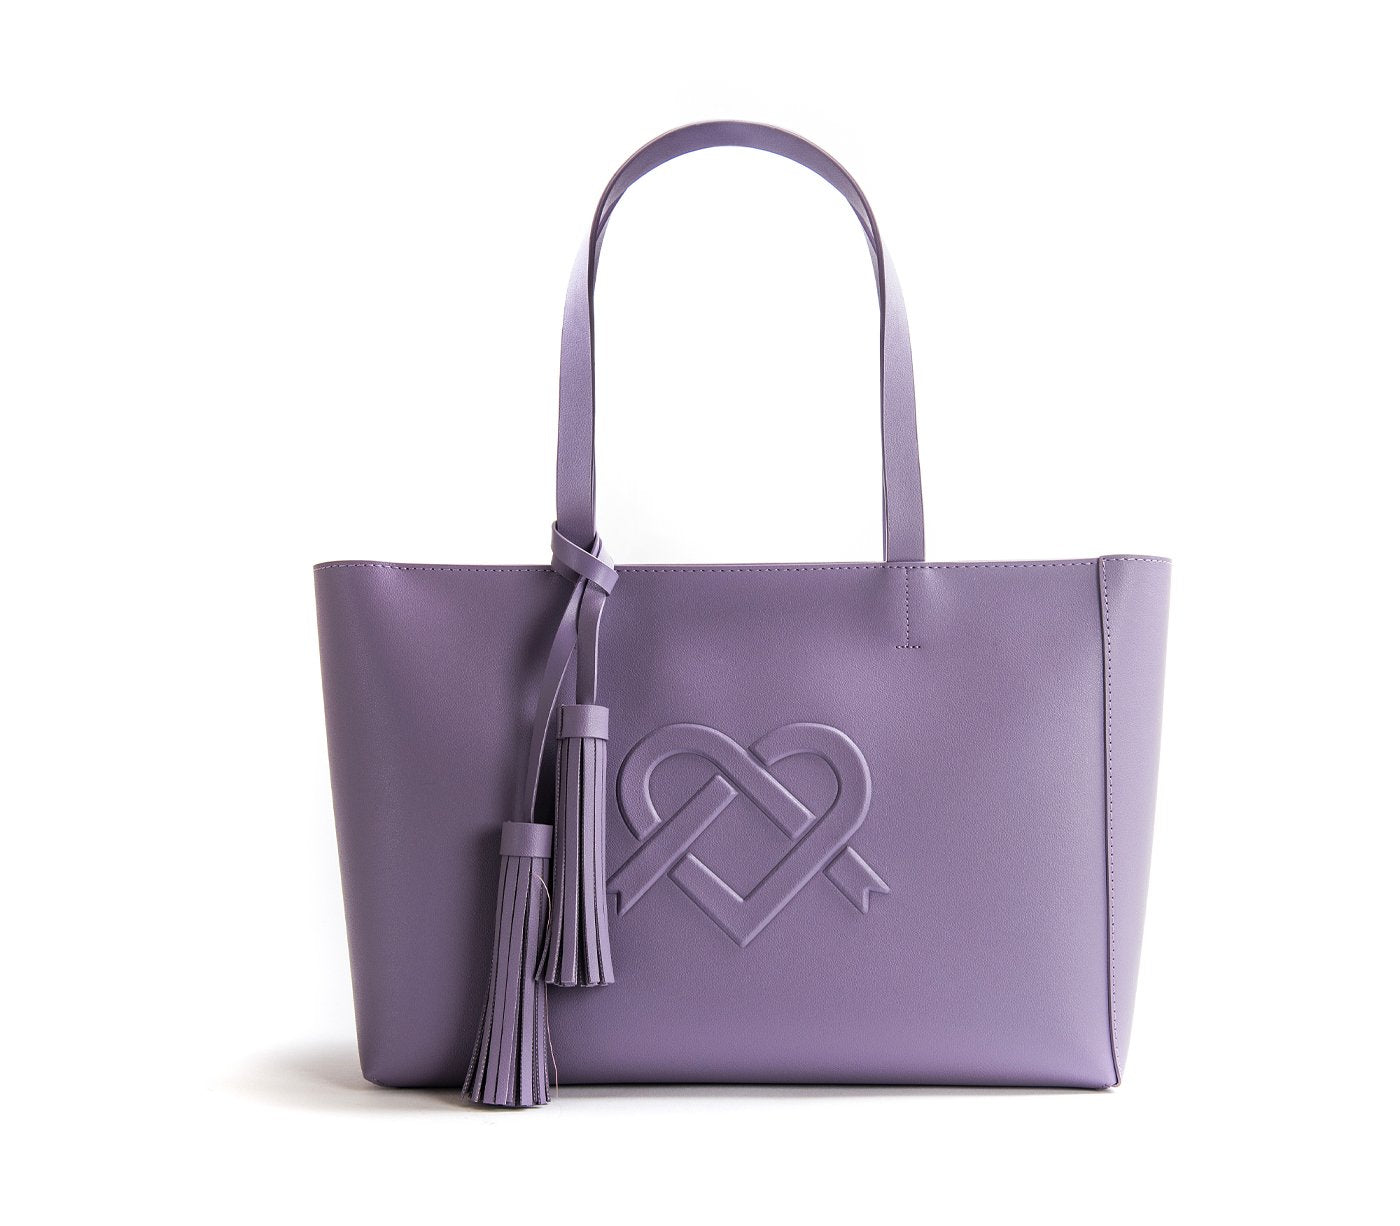 Tippi - Lilac Vegan Leather Tote Bag - LOLA LUXE